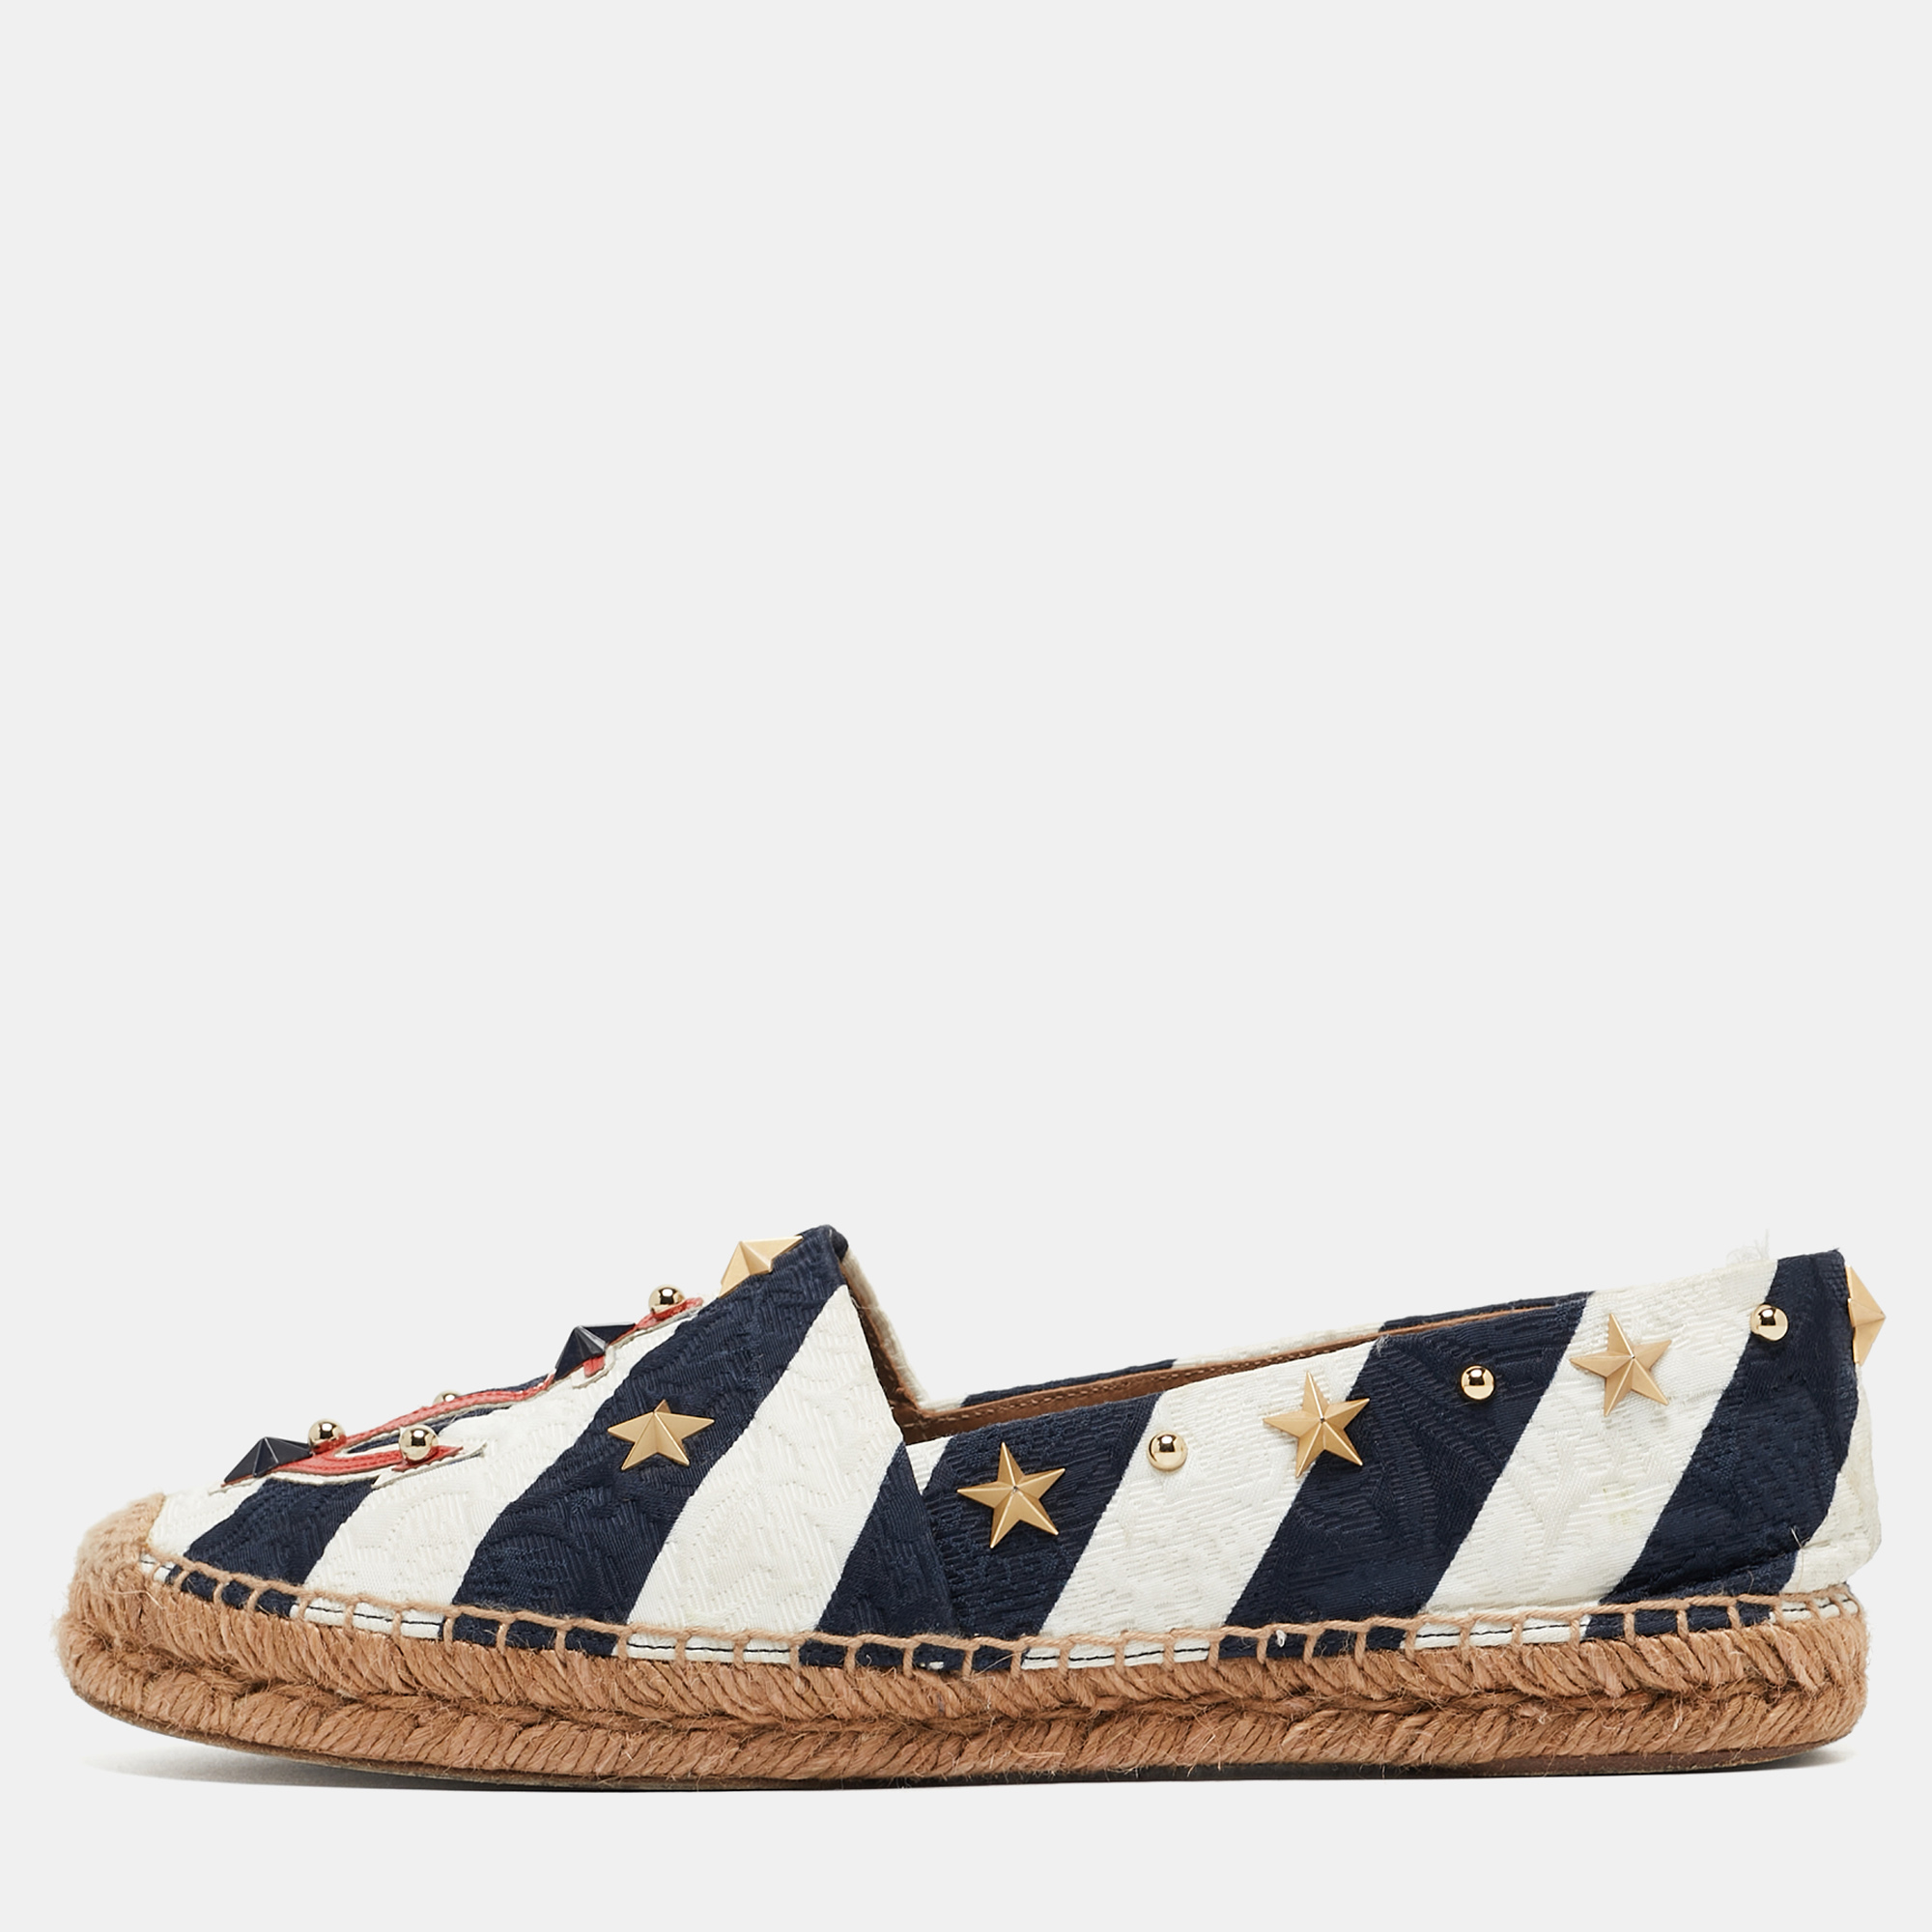 Let this comfortable pair be your first choice when youre out for a long day. These Dolce and Gabbana espadrilles have well sewn uppers beautifully set on durable soles.